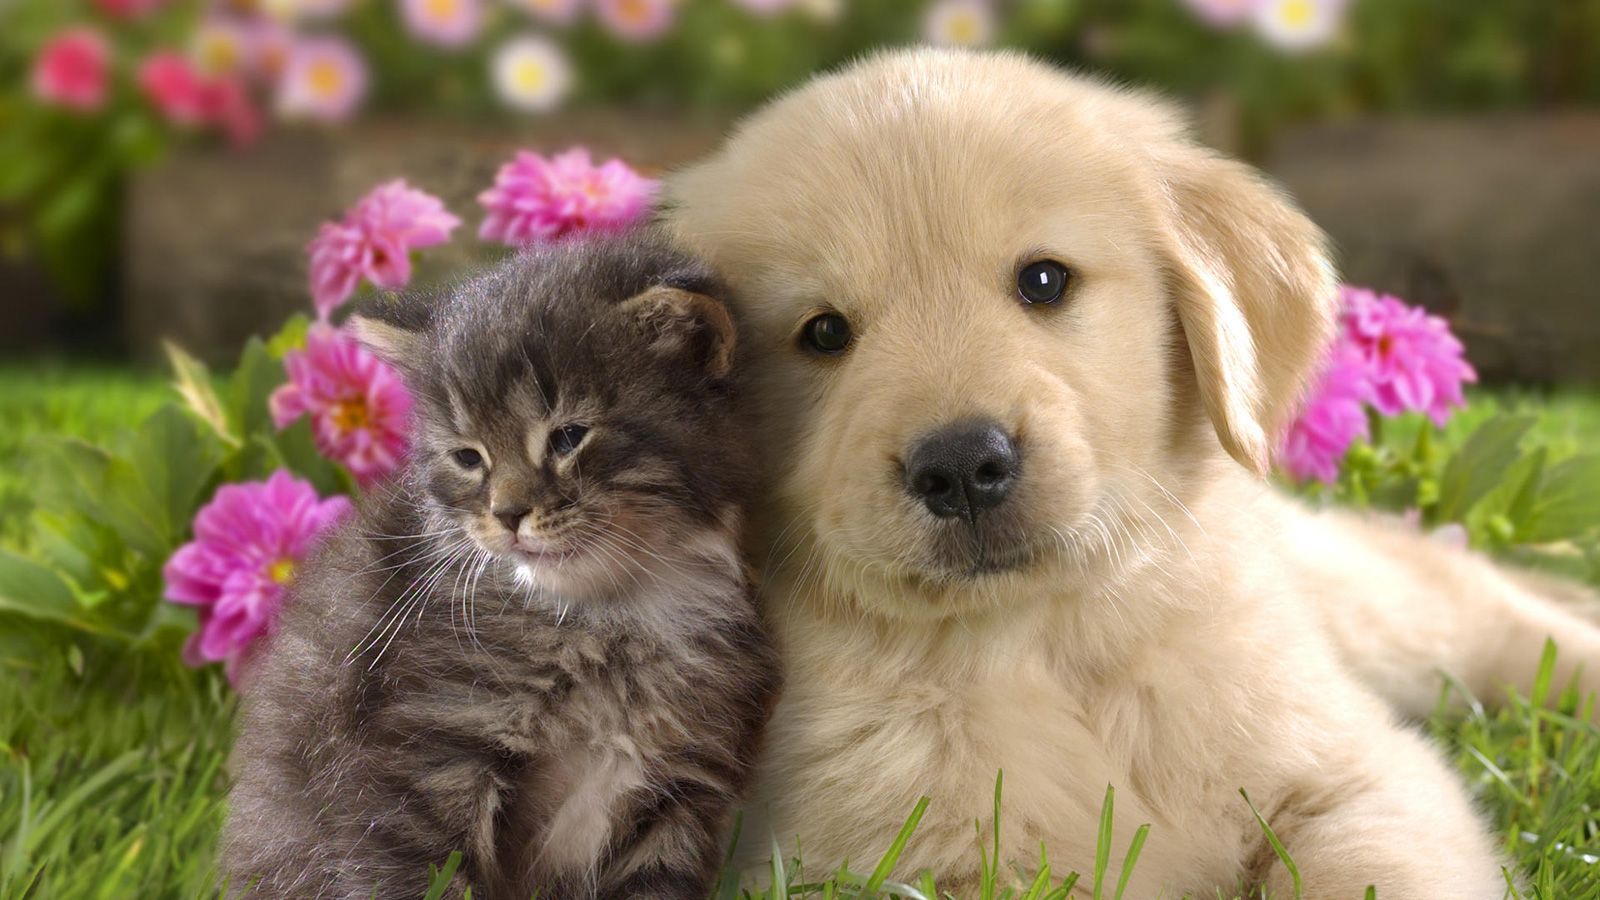 cat and dog together wallpapers free